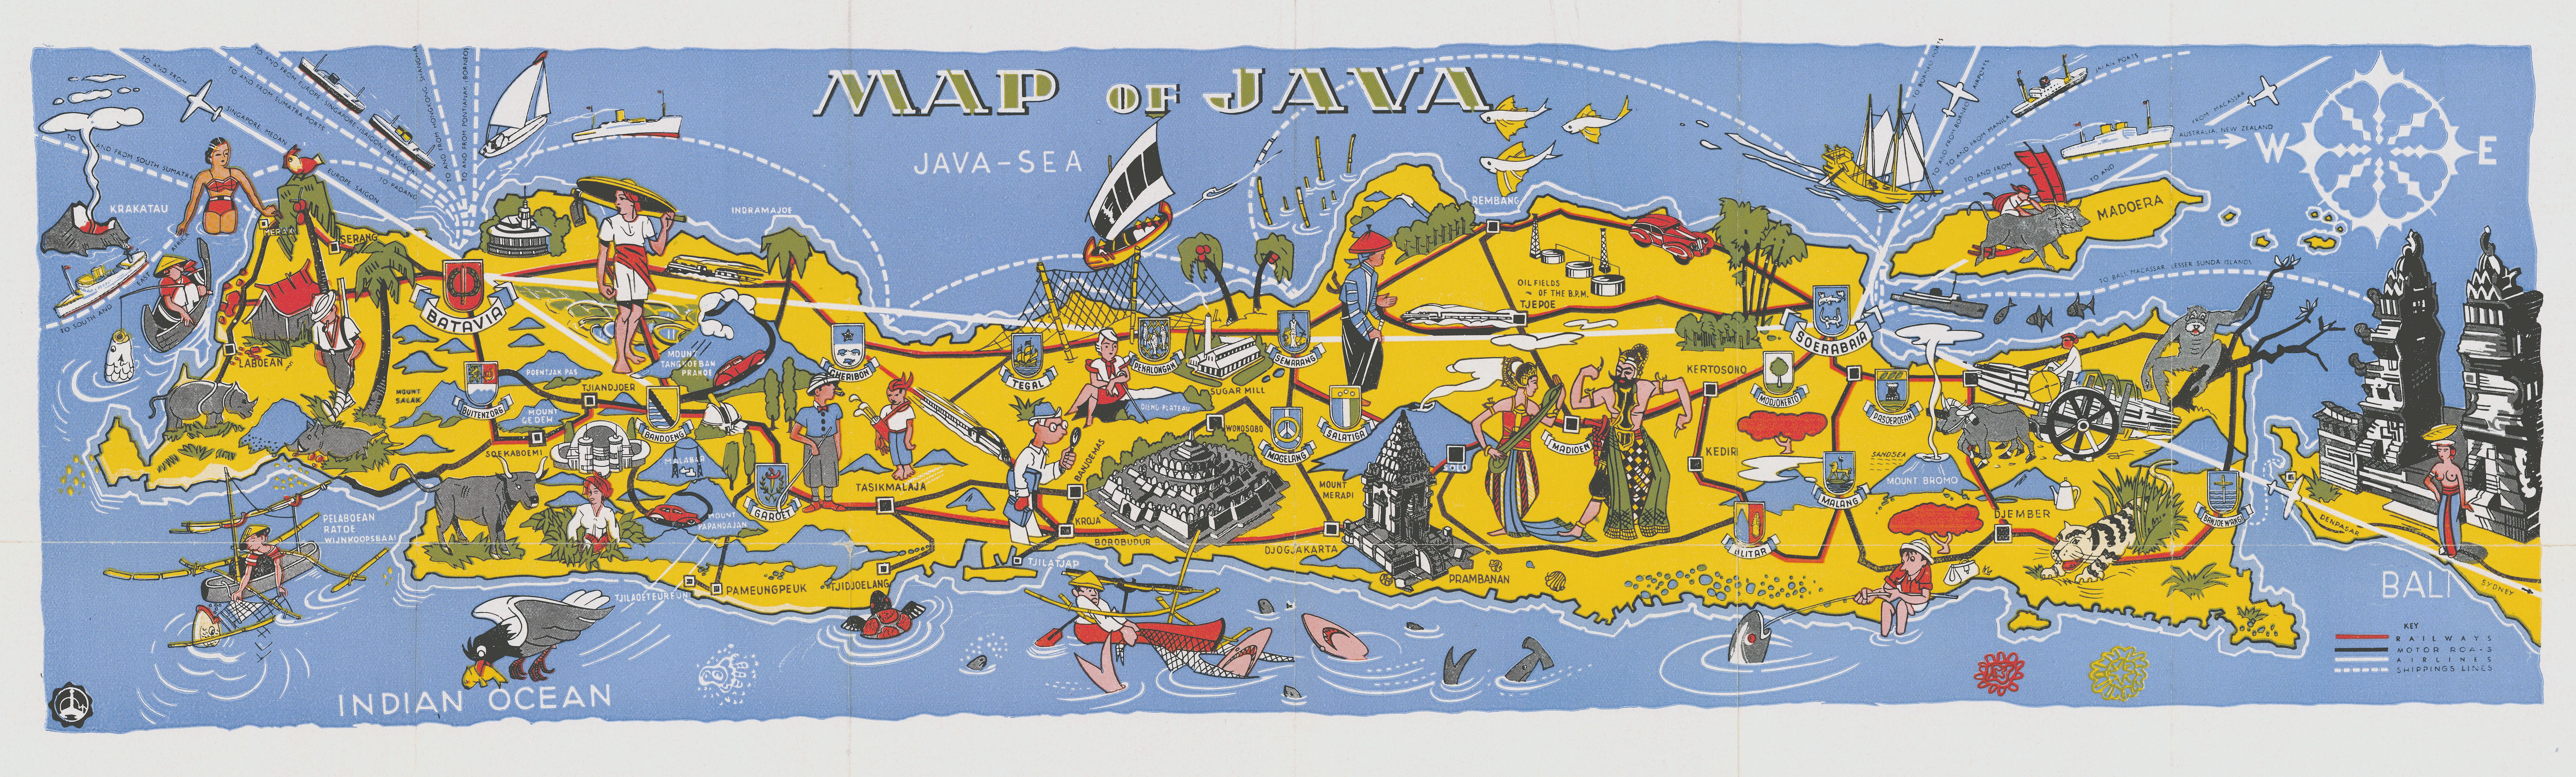 Fascinating Historical Picture of Java in 1938 